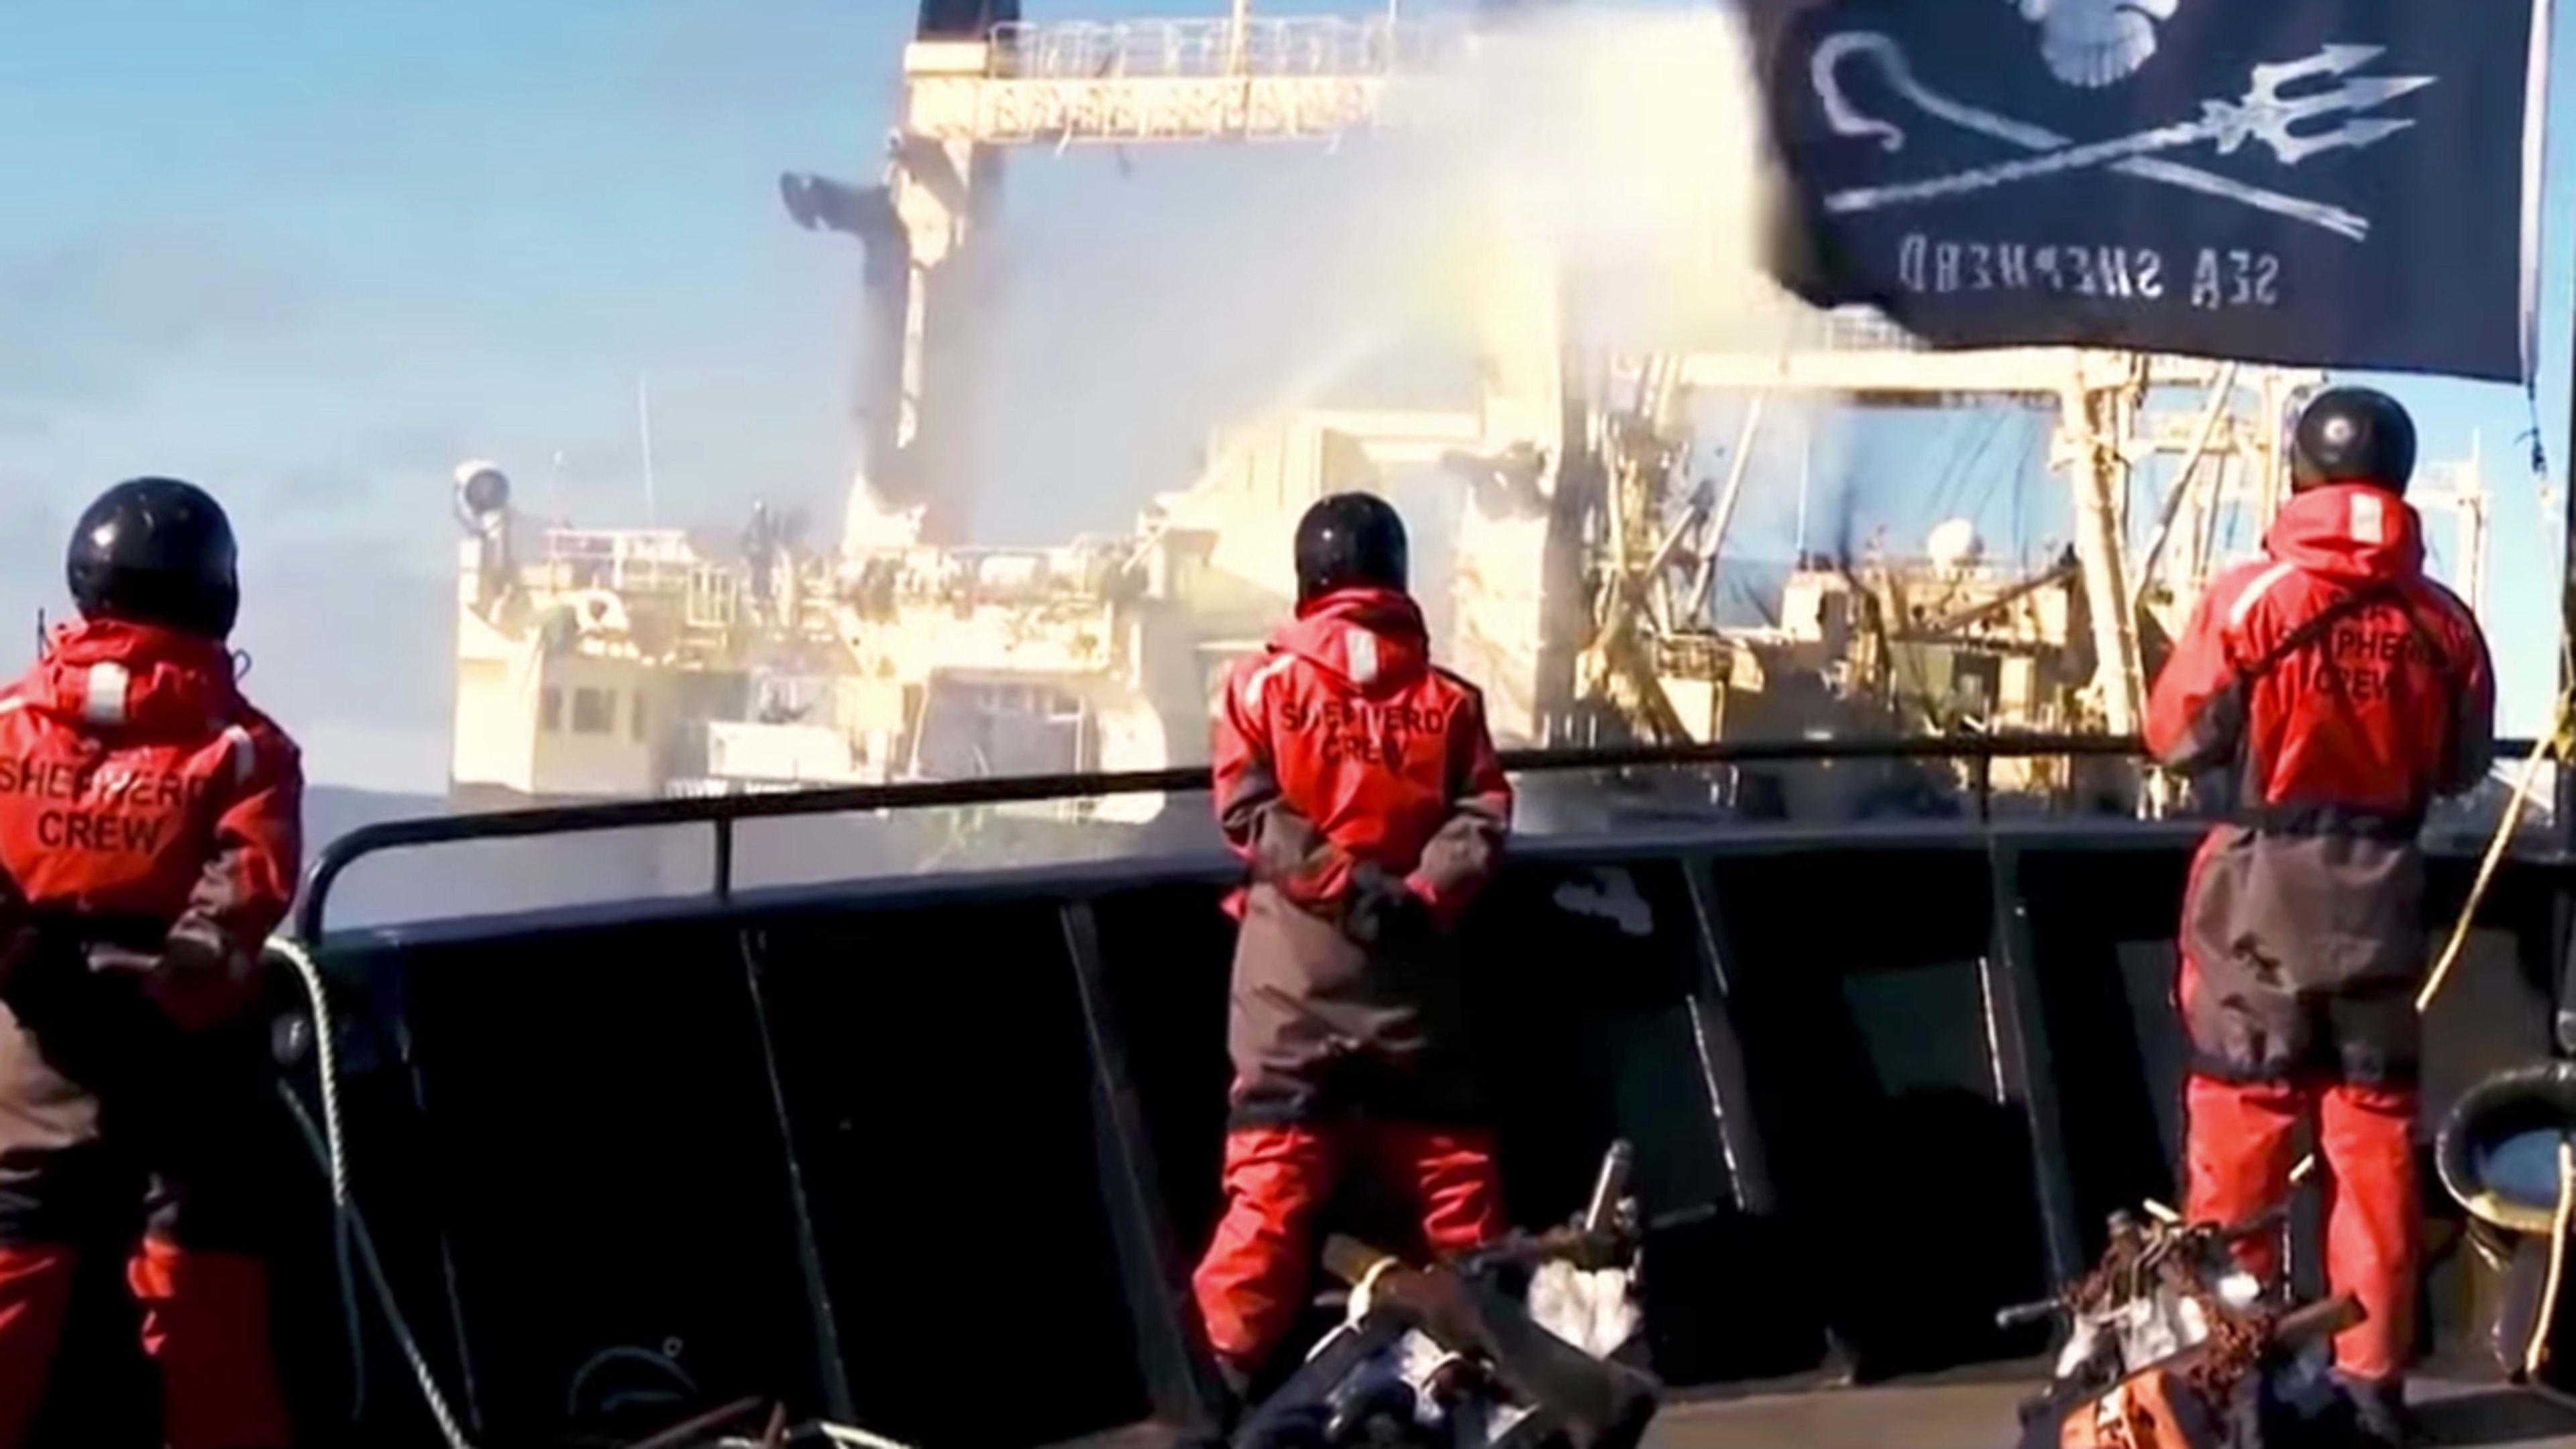 A Sea Shepherd Documentary Created By Two Unlikely Partners